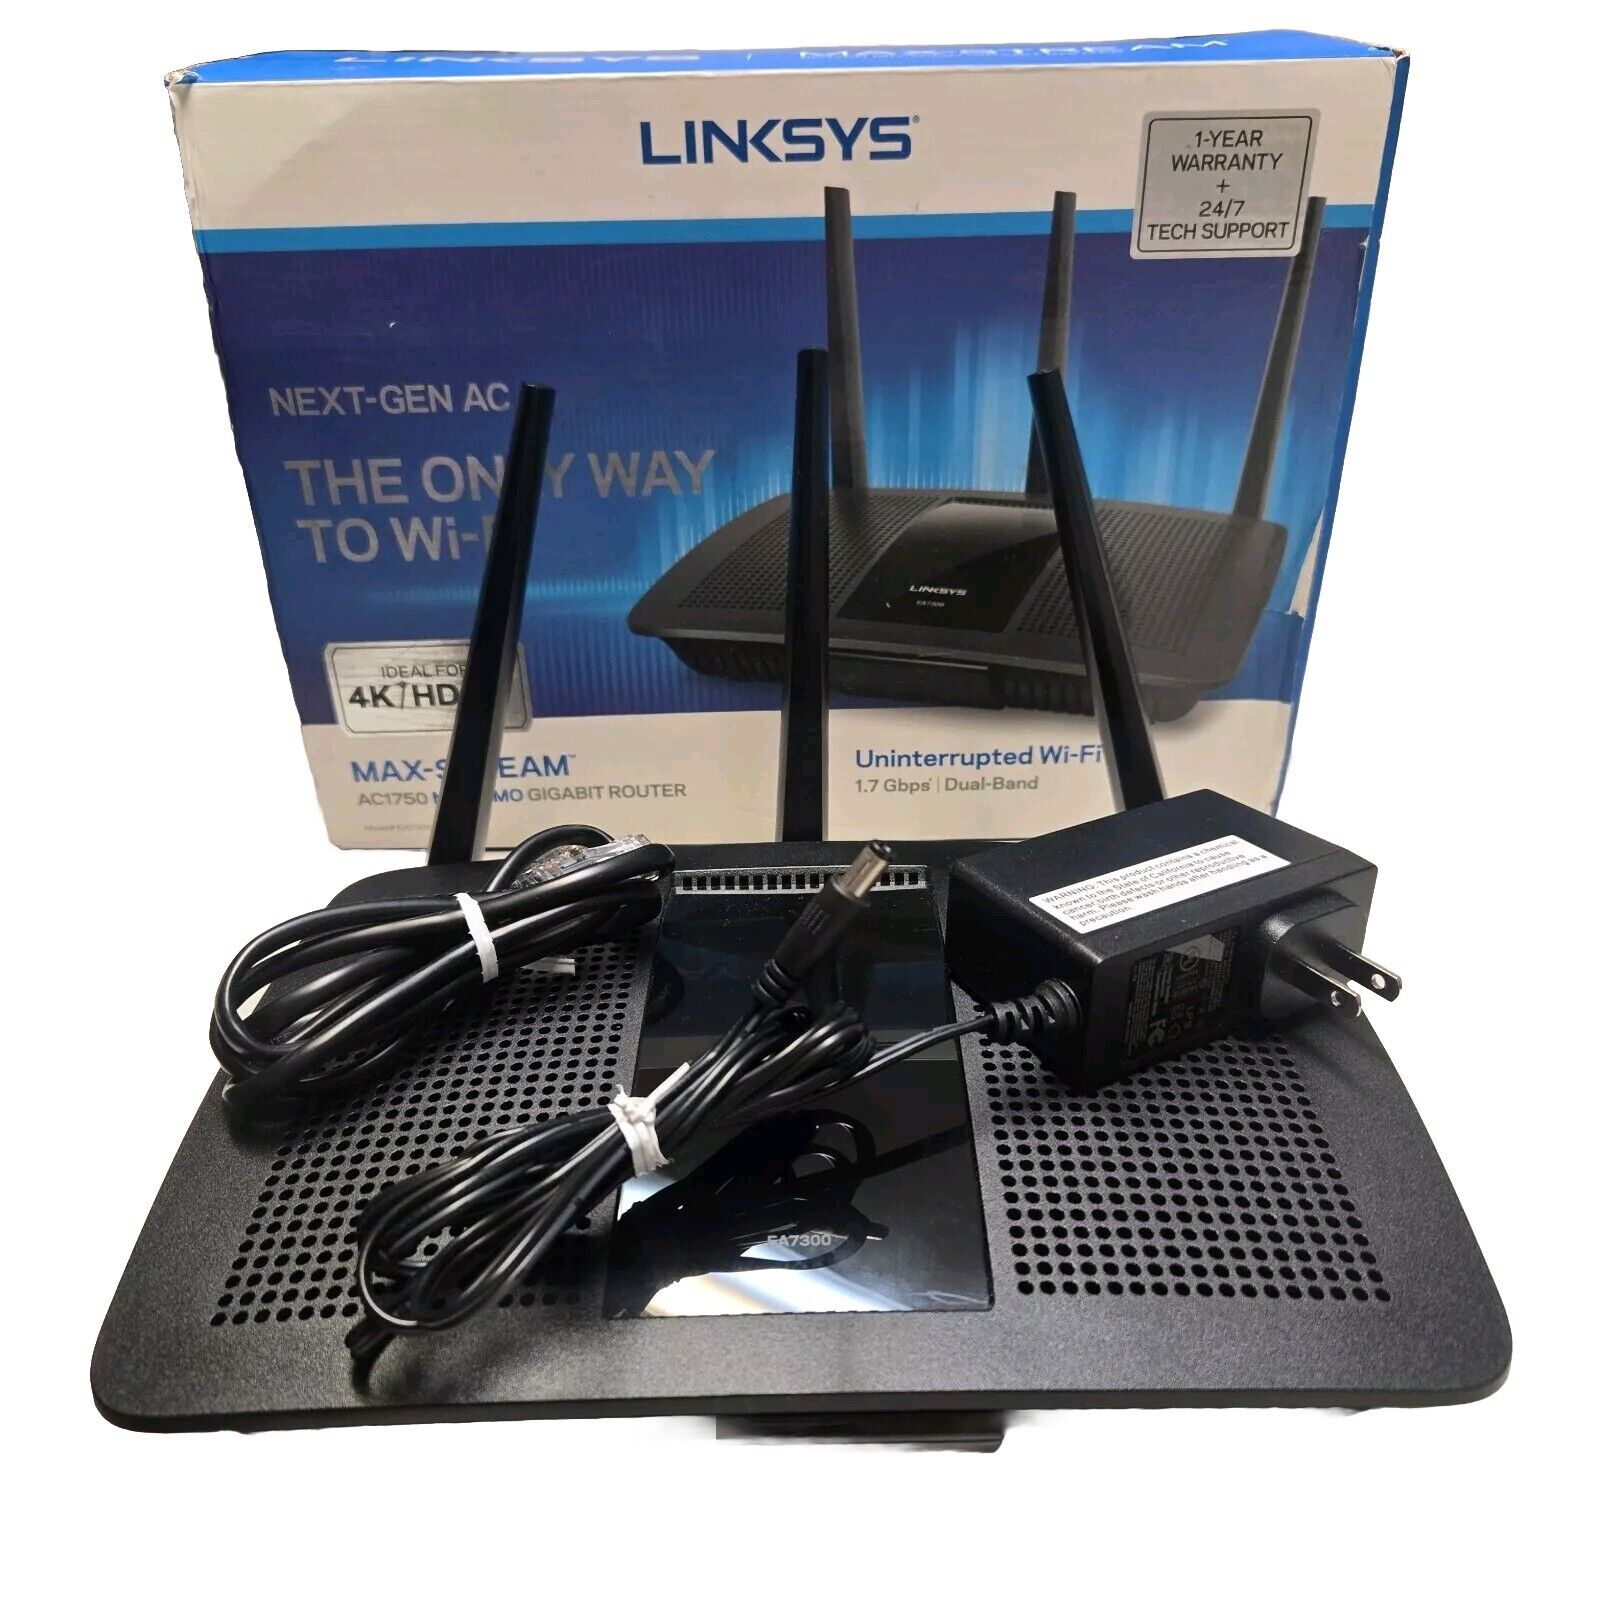 Linksys Router EA7300 Max-Stream: AC1750 Dual-Band Wi-Fi. Work's great